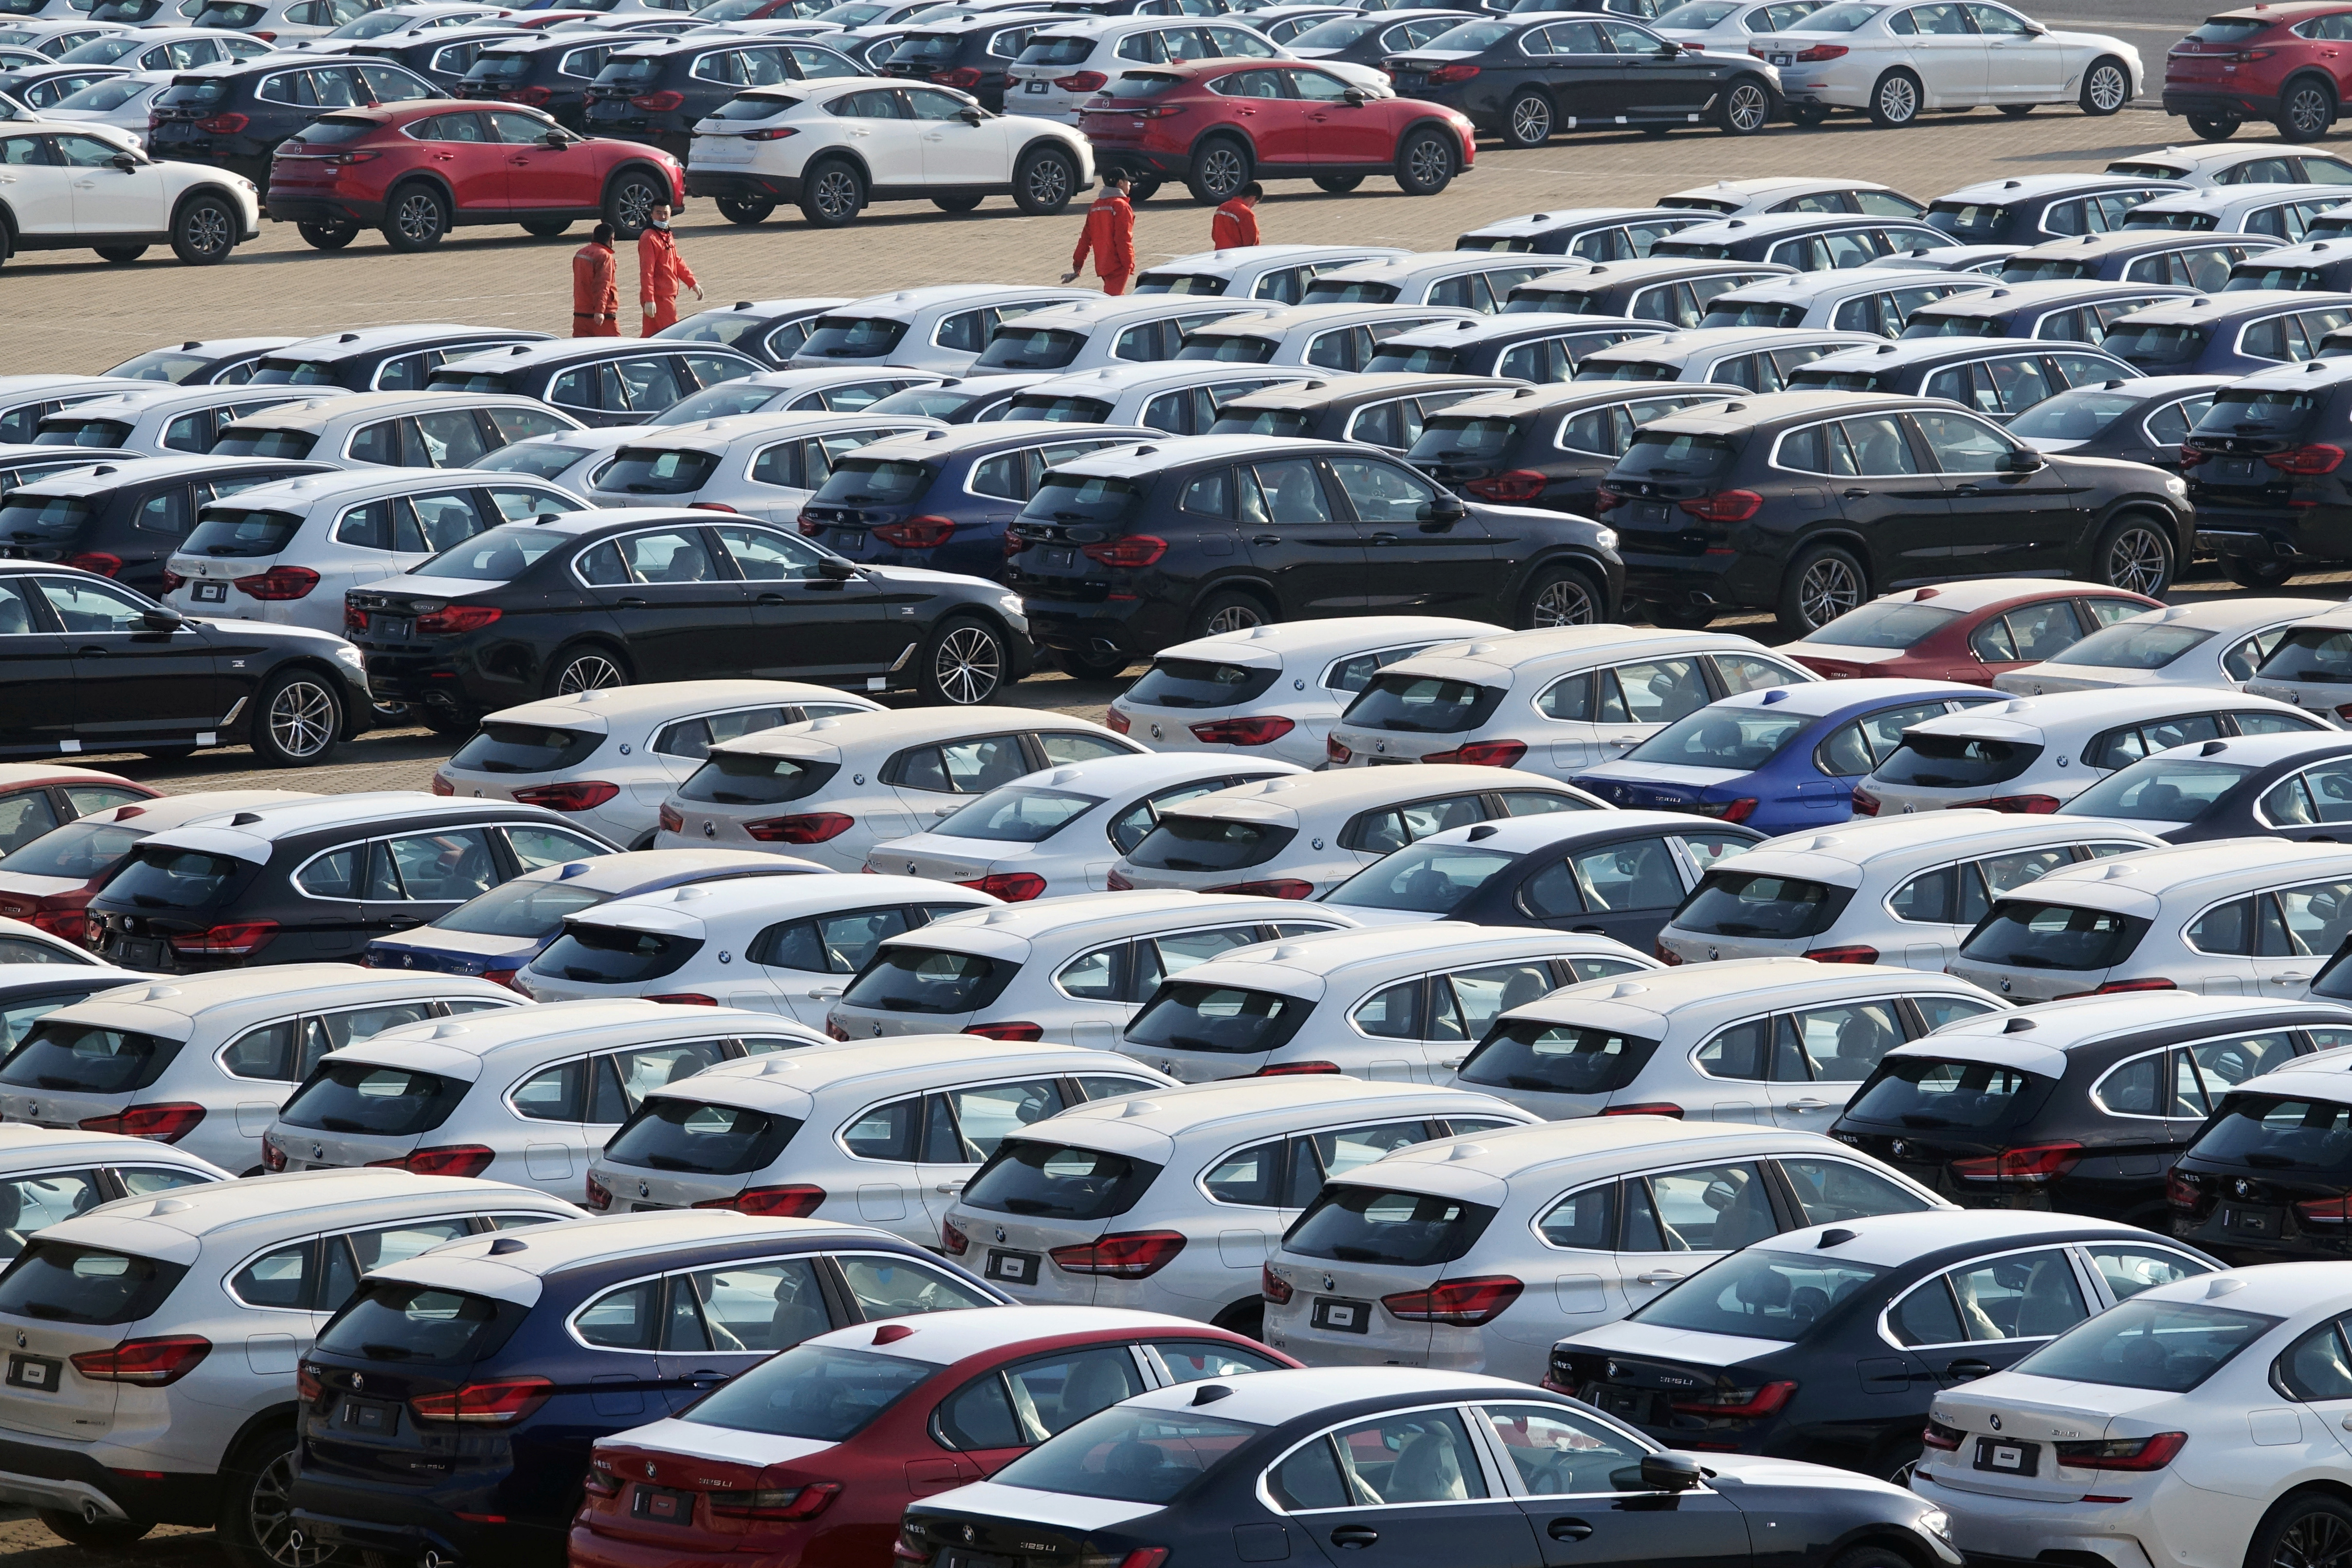 Newly manufactured cars are seen at a port in Dalian, Liaoning province, China April 10, 2020. China Daily via REUTERS ATTENTION EDITORS - THIS IMAGE WAS PROVIDED BY A THIRD PARTY. CHINA OUT. - RC2J1G9ZJA4M